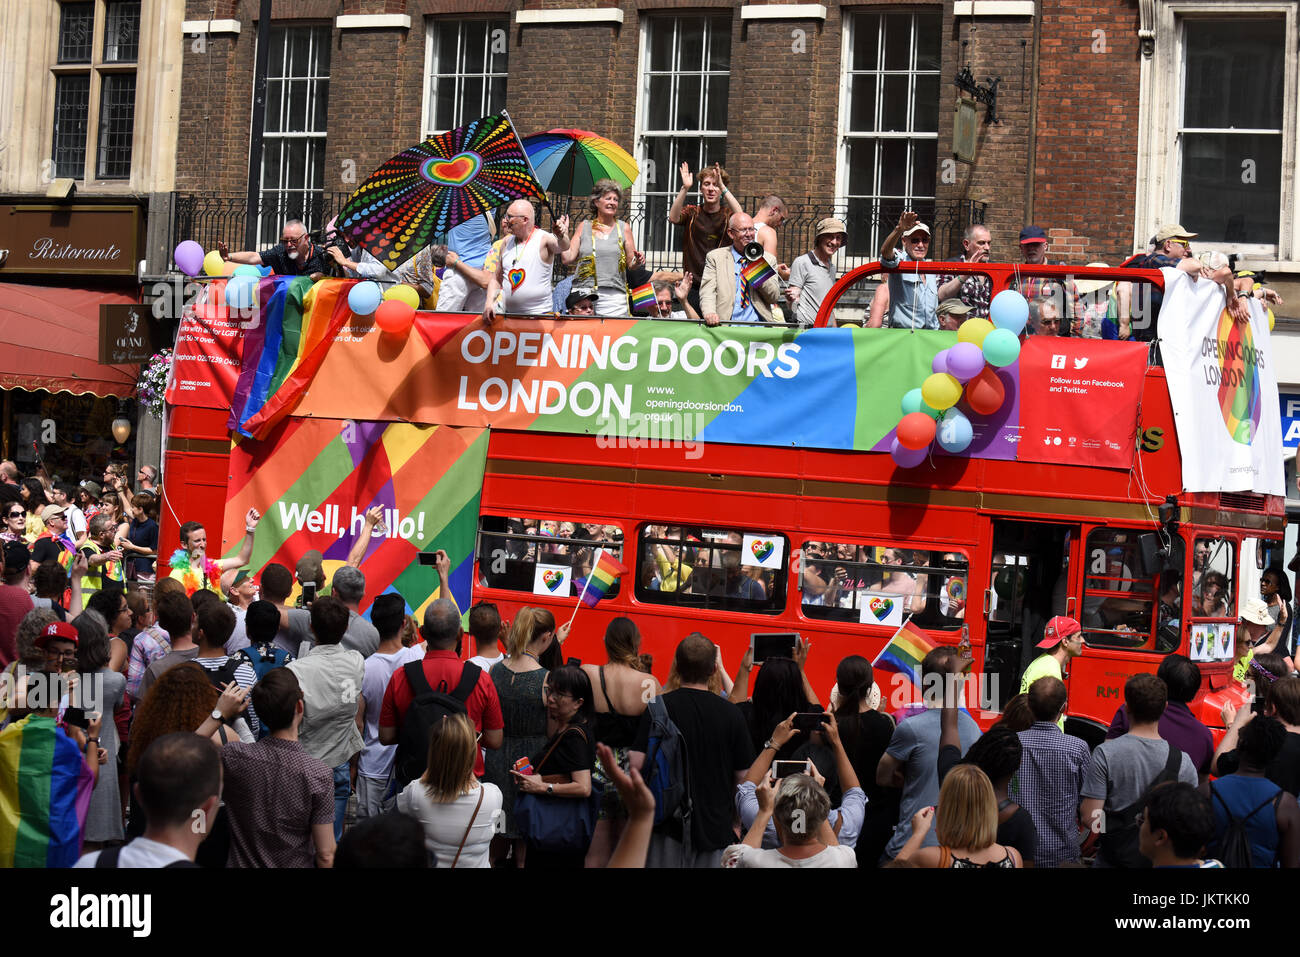 Supporters of the Opening Doors London charity drive on the double-decker red bus through central London at the Pride in London parade, 2017. Stock Photo